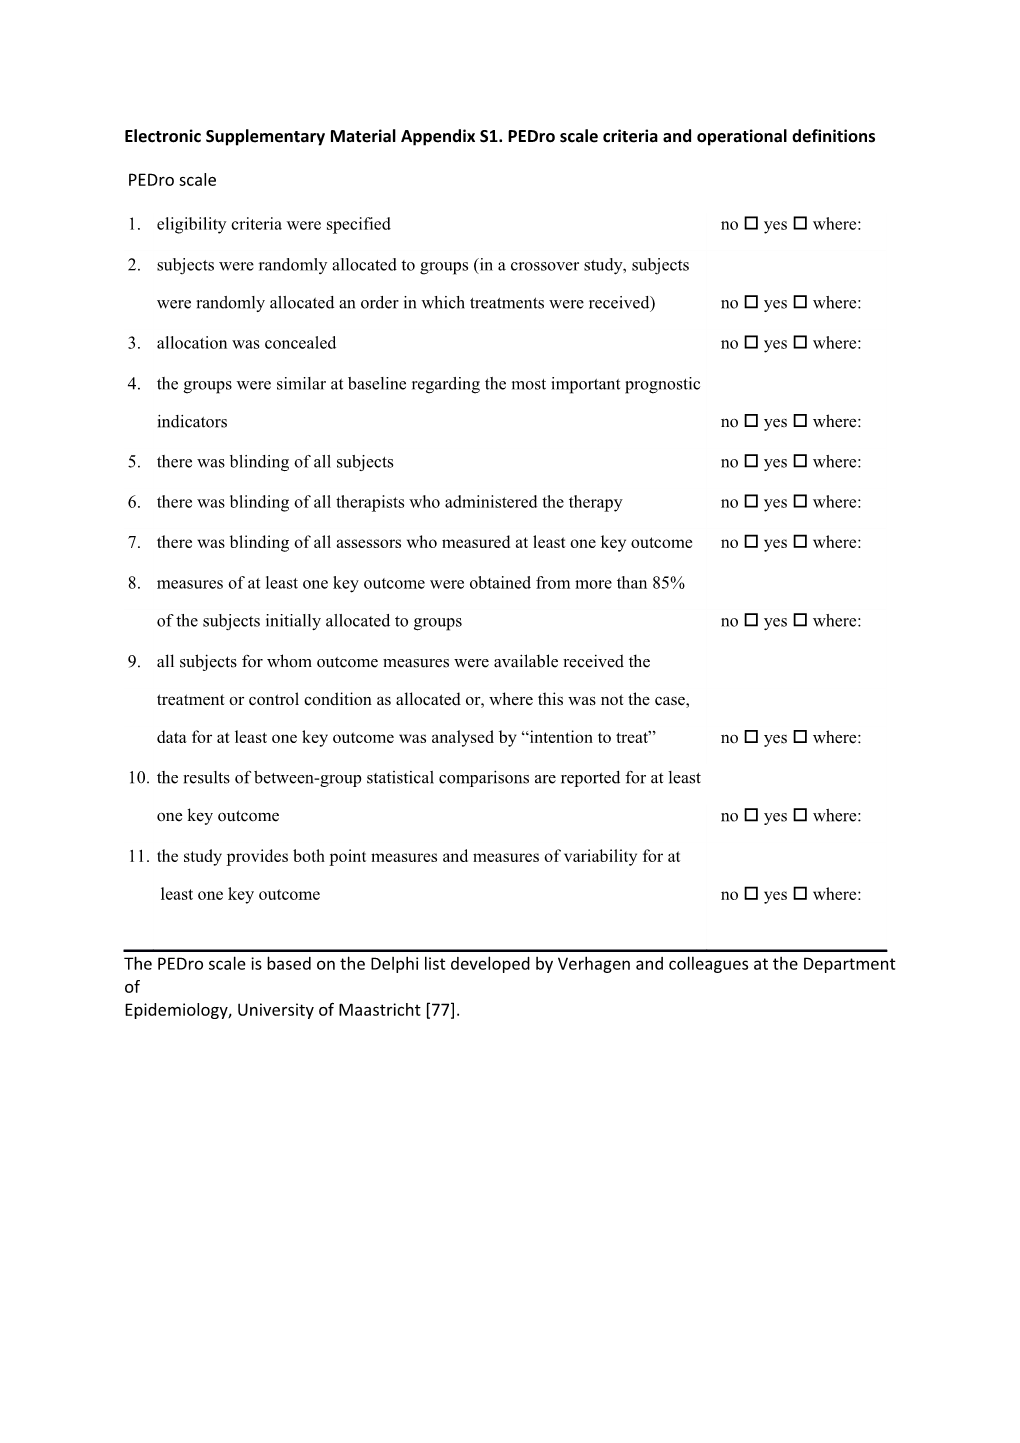 Electronic Supplementary Material Appendix S1.Pedro Scale Criteria and Operational Definitions